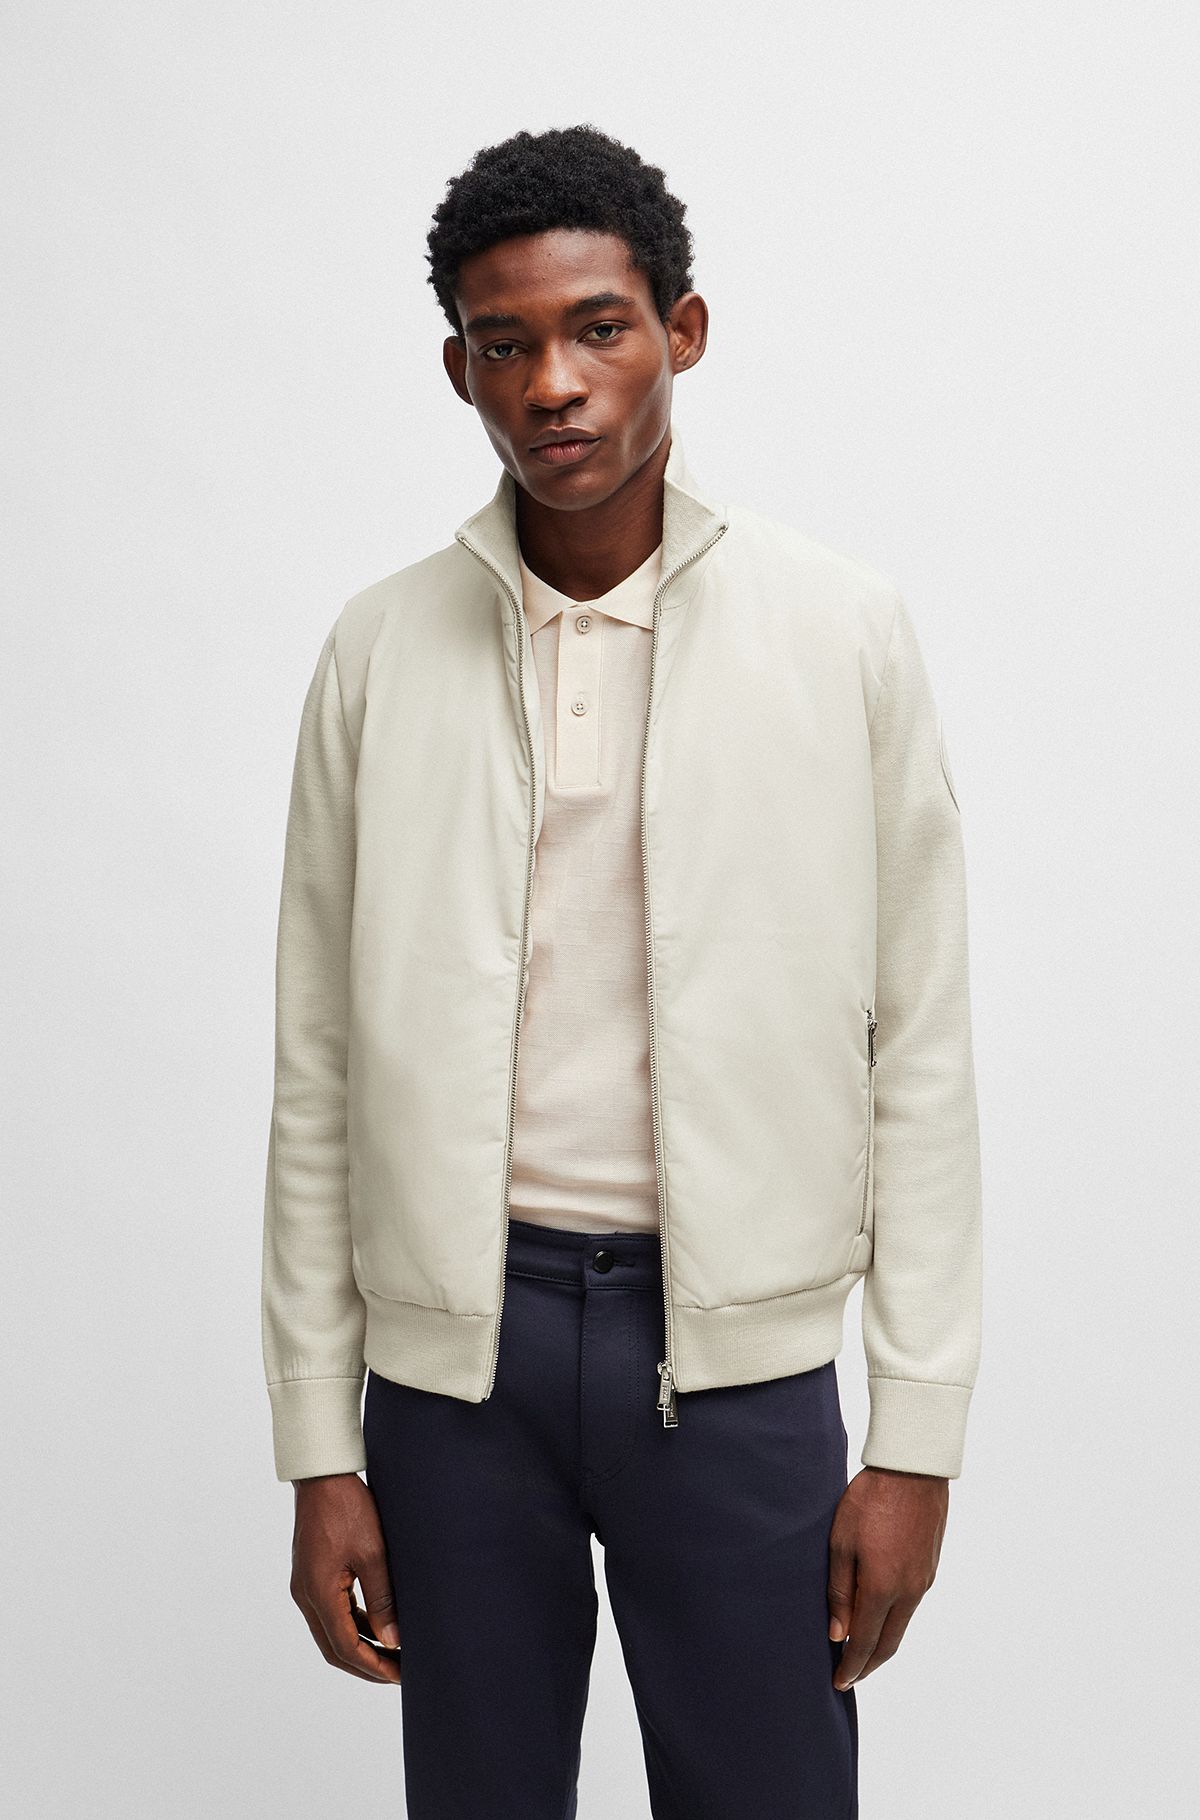 Porsche x BOSS mixed-material jacket with special branding, White